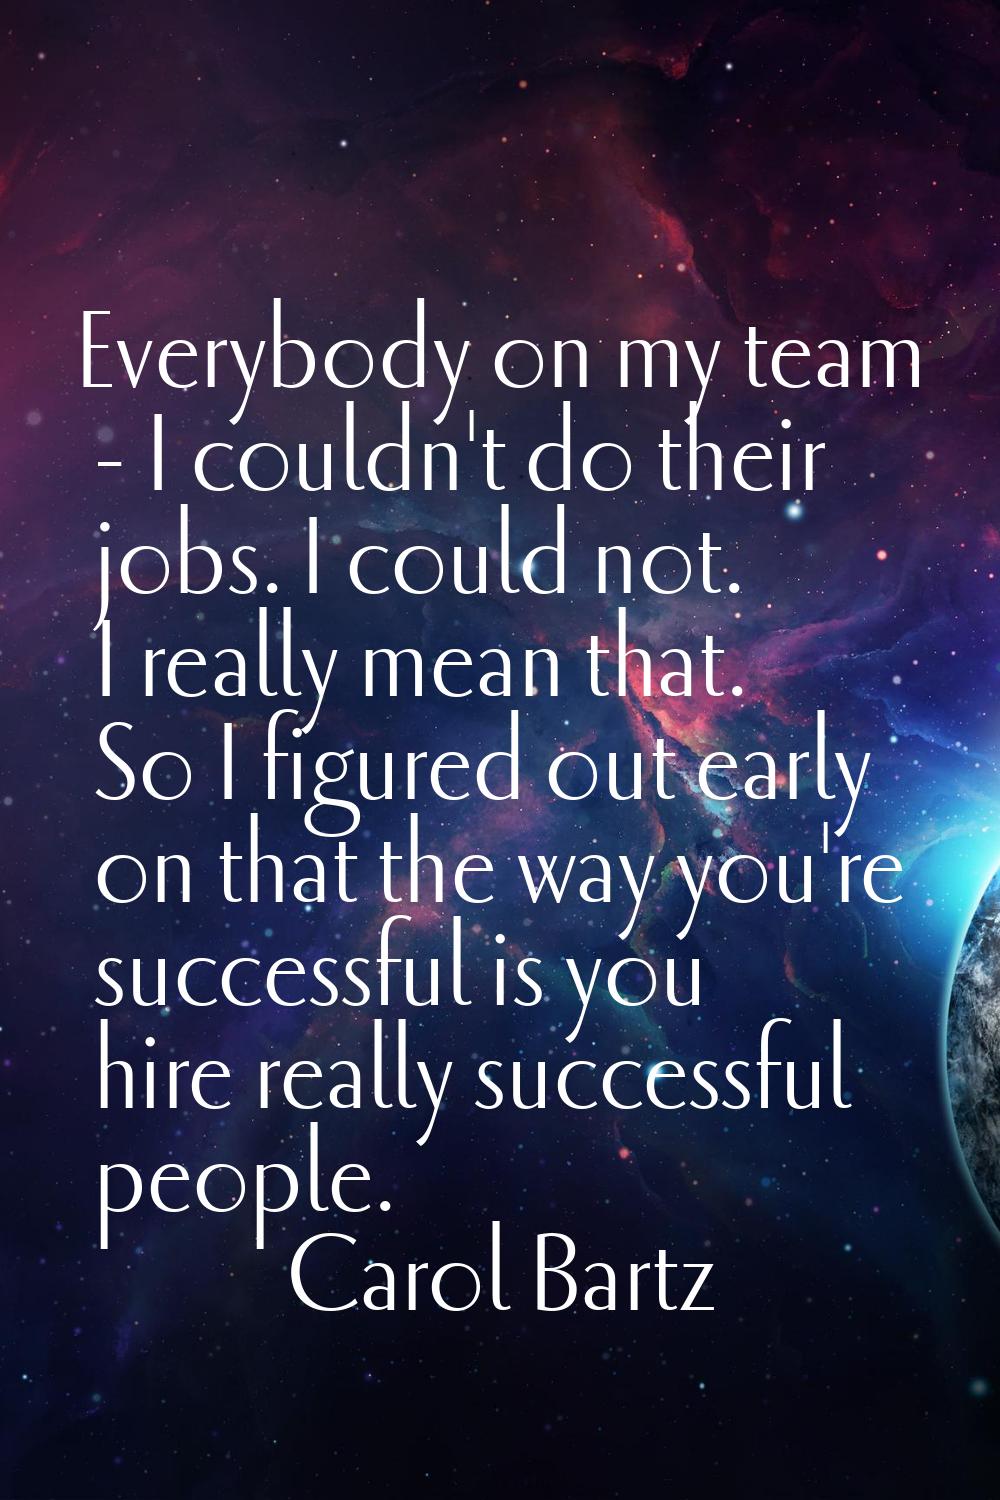 Everybody on my team - I couldn't do their jobs. I could not. I really mean that. So I figured out 